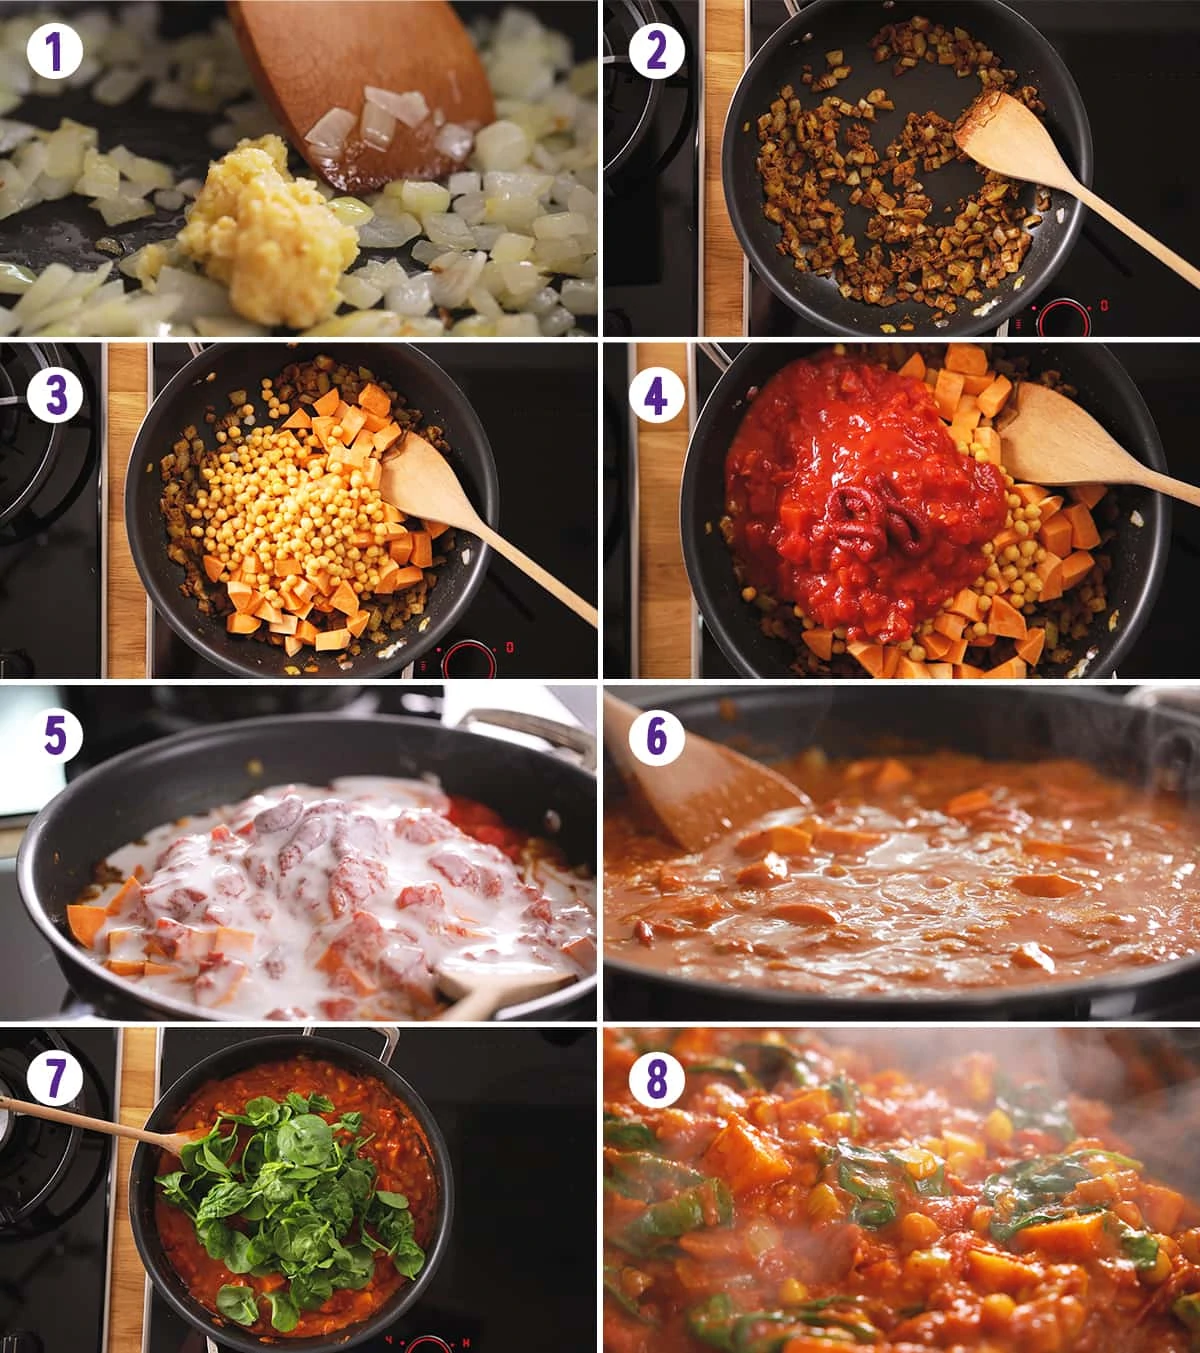 8 image collage showing how to make chickpea and sweet potato curry